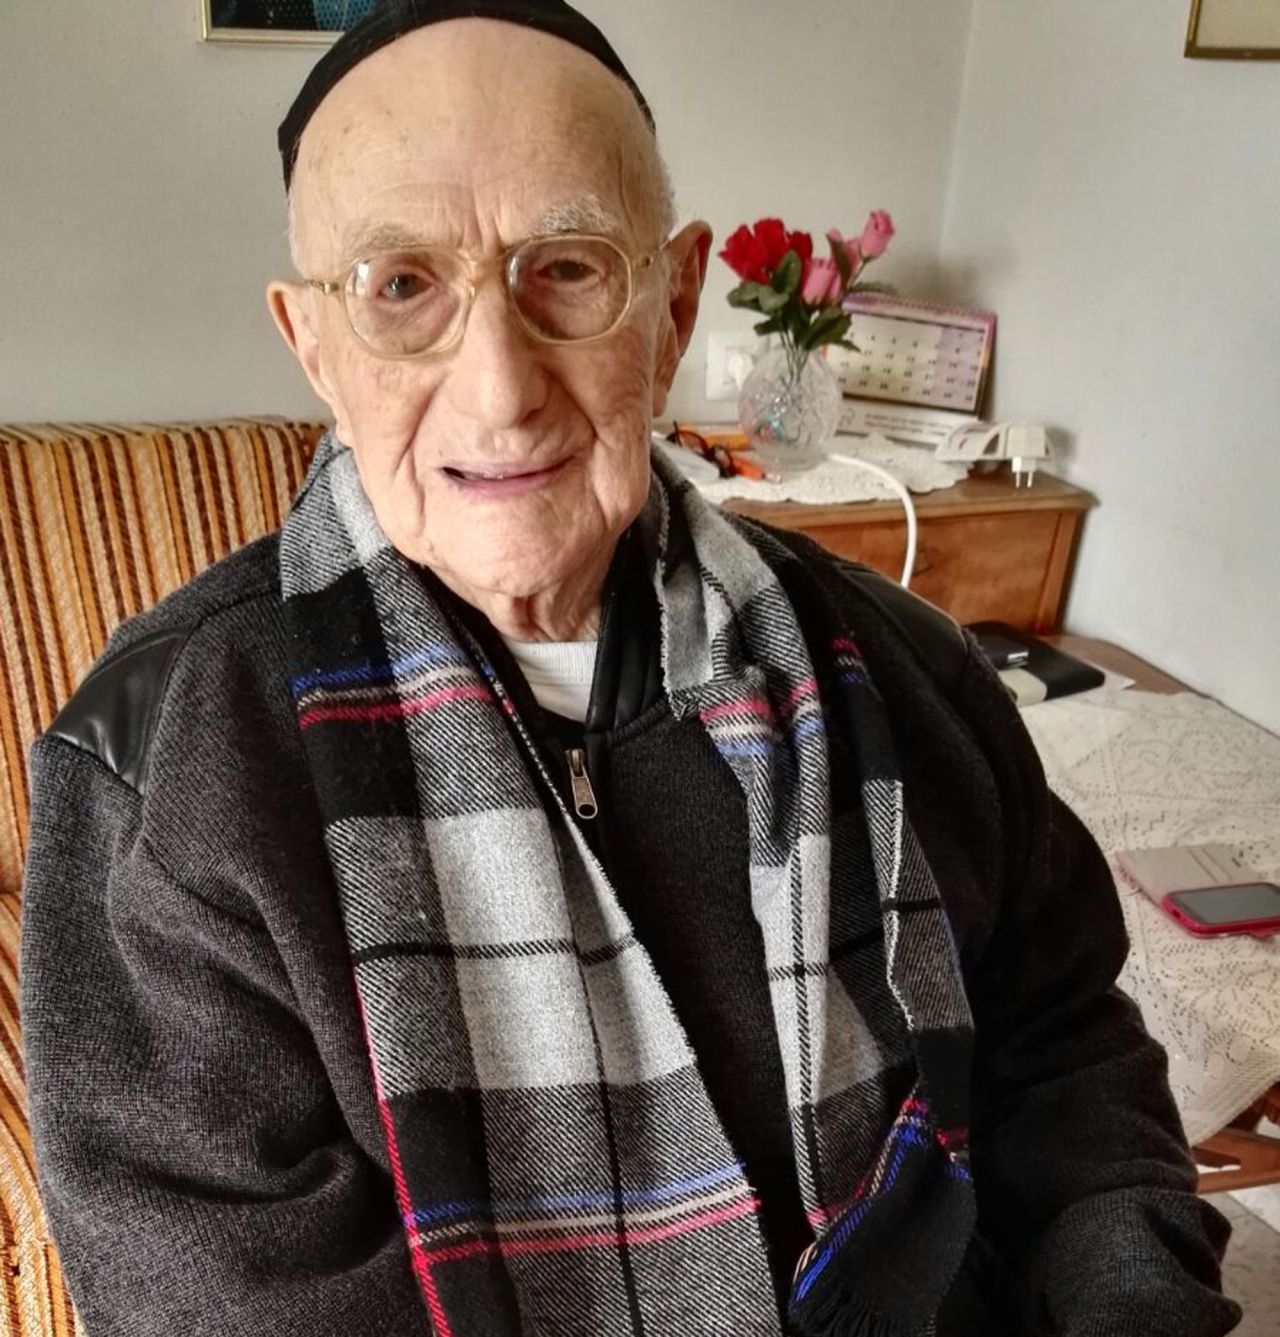 Yisrael Kristal, 113, lives in Haifa, Israel, but grew up in Poland and survived being sent to Auschwitz. He ran candy stores in Lodz and in Haifa but keeps a healthy and simple diet. He credited that, along with prayer, for his longevity. He celebrated his bar mitzvah, which had been delayed by World War I, <a href="http://www.cnn.com/2016/09/16/middleeast/worlds-oldest-man-bar-mitzvah/">when he turned 113. </a>